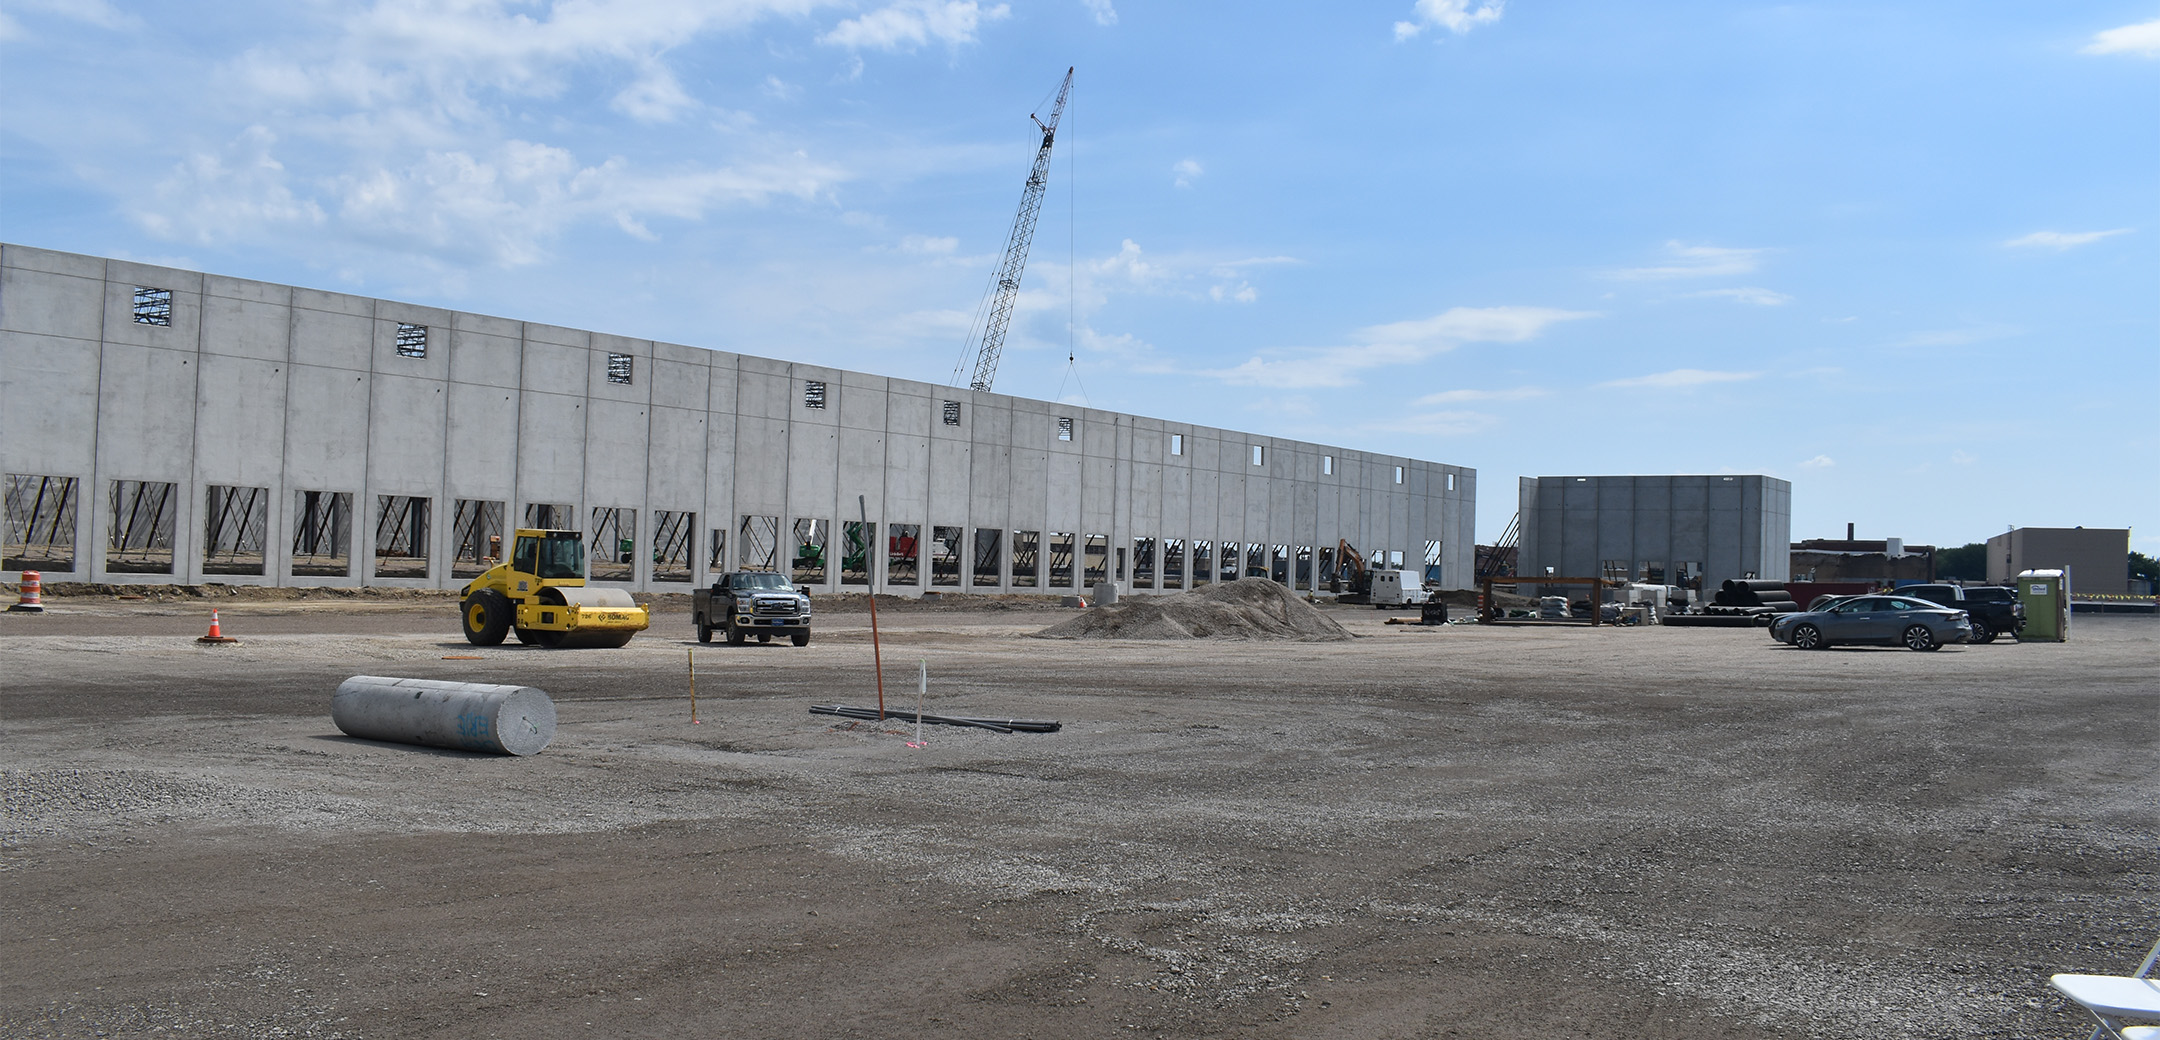 A groundview of part of the Crown 95 Logistics Center under construction with gray wall panels on a dirt covered project site